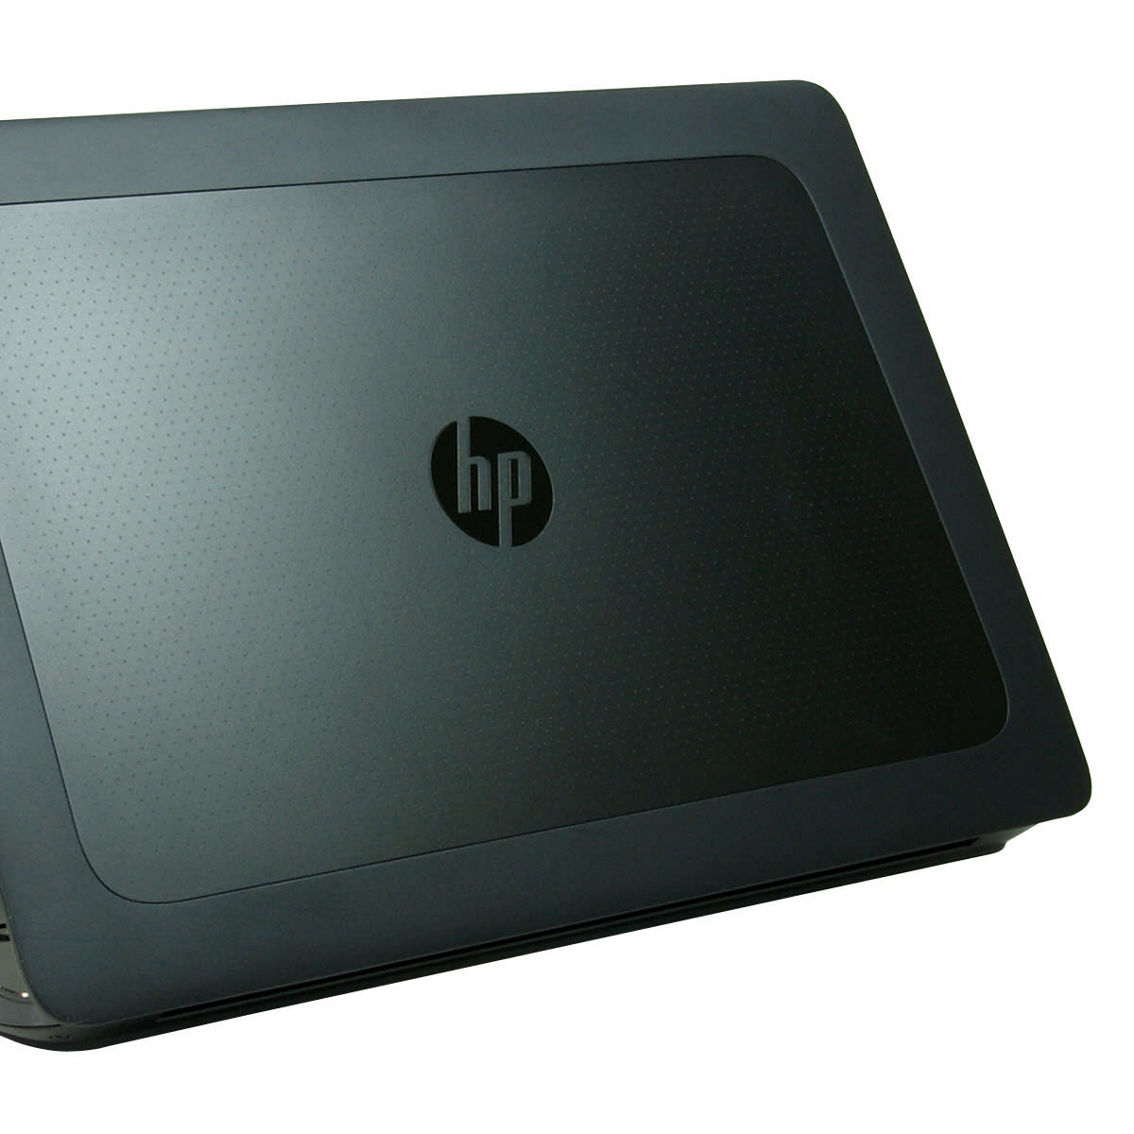 HP ZBook 15 G3 Core i7-6700HQ 2.6GHz 32GB 1TB SSD Laptop (Refurbished) - Image 2 of 3